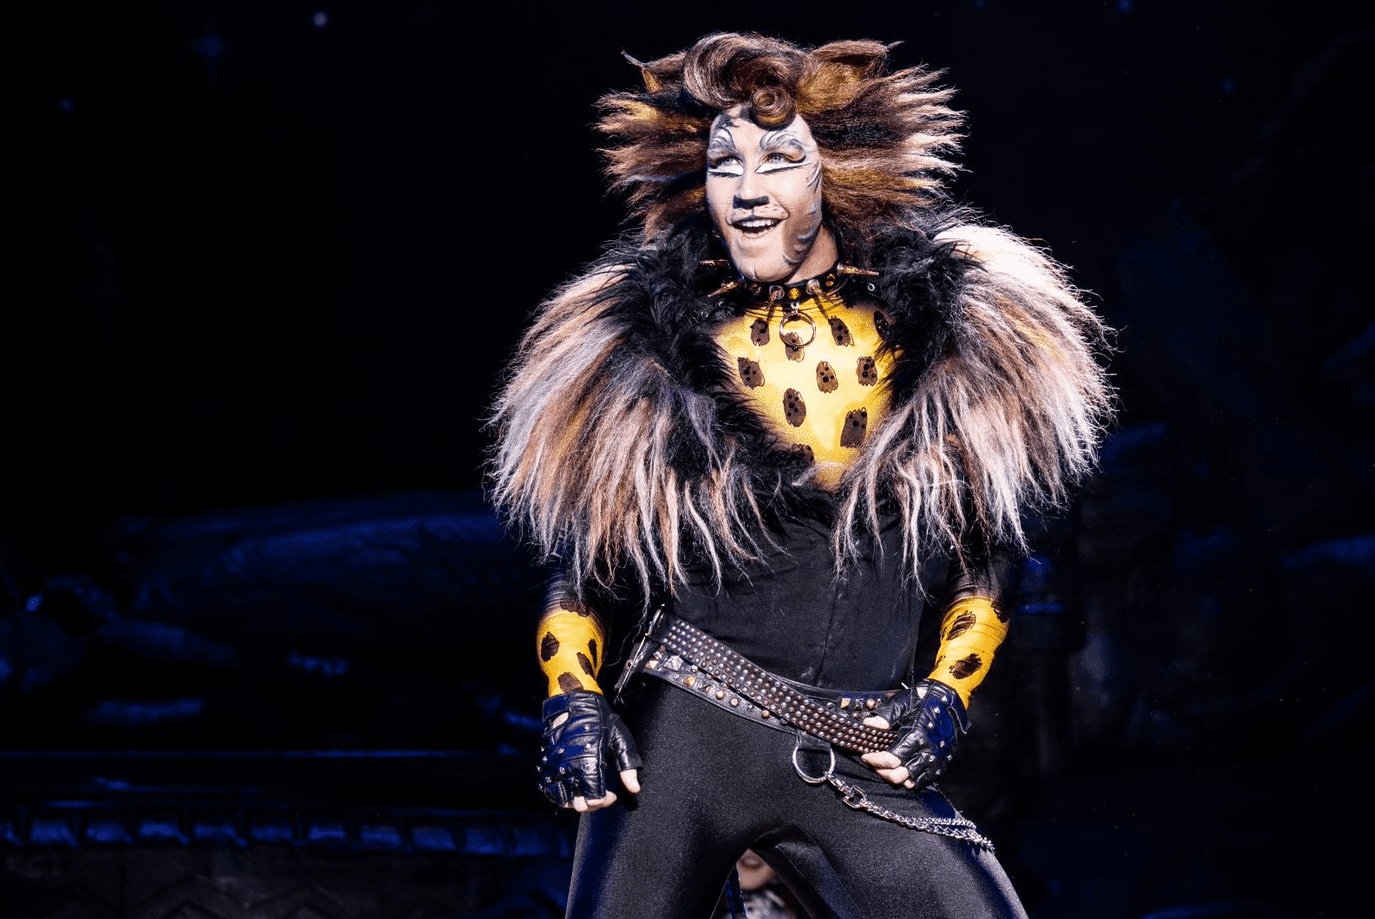 Zach Bravo plays the role of Rum Tum Tugger. Zach is wearing a black outfit with a yellow, spotted shirt underneath his jacket. He has a studded belt and fingerless gloves on. Rum Tum Tugger's fur is orange and white.